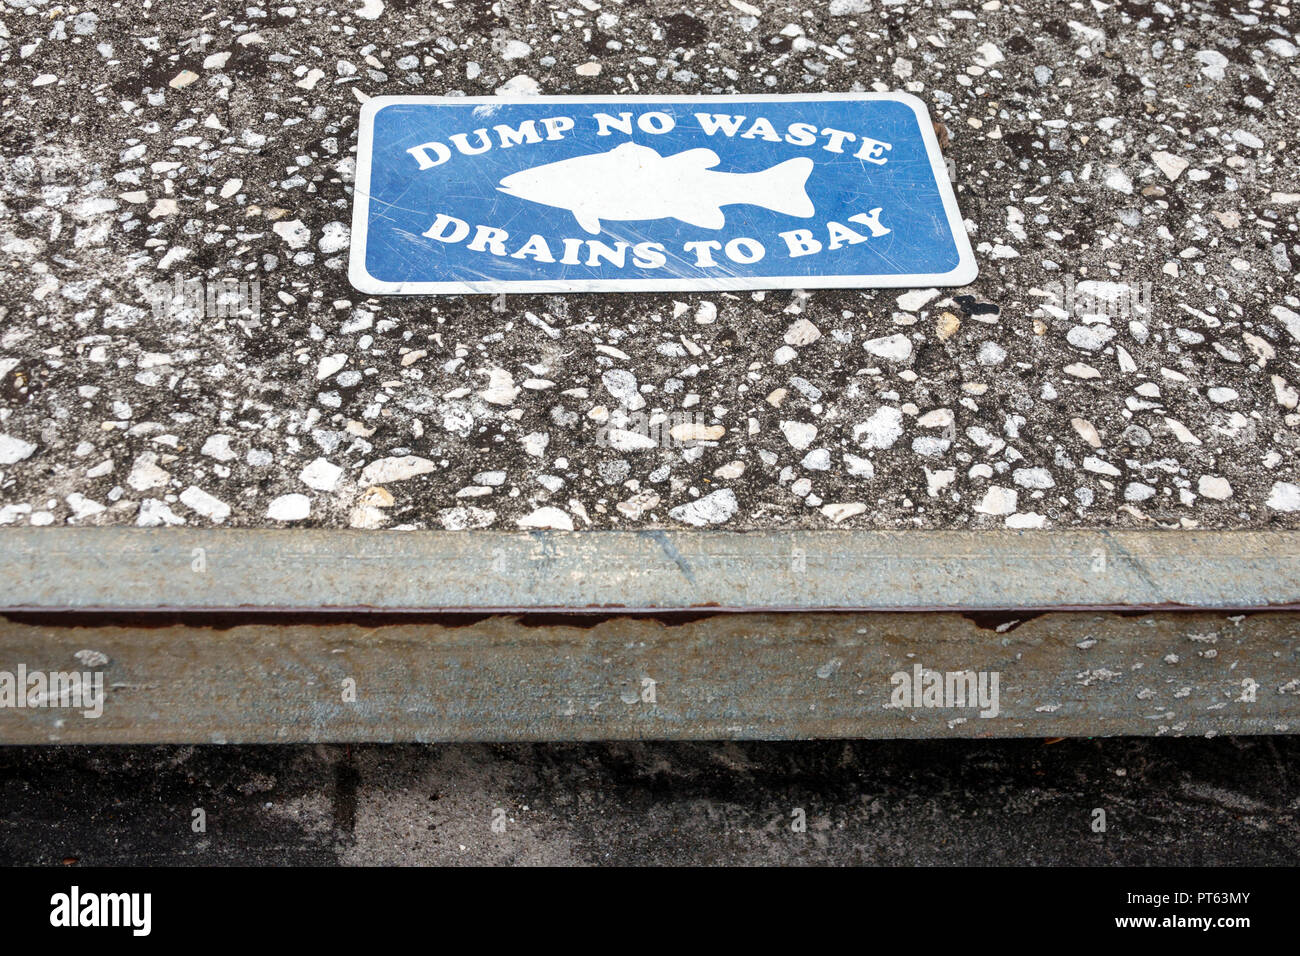 St. Saint Petersburg Florida,Central Avenue,sewer entrance,no dumping waste drains to bay,FL180731136 Stock Photo